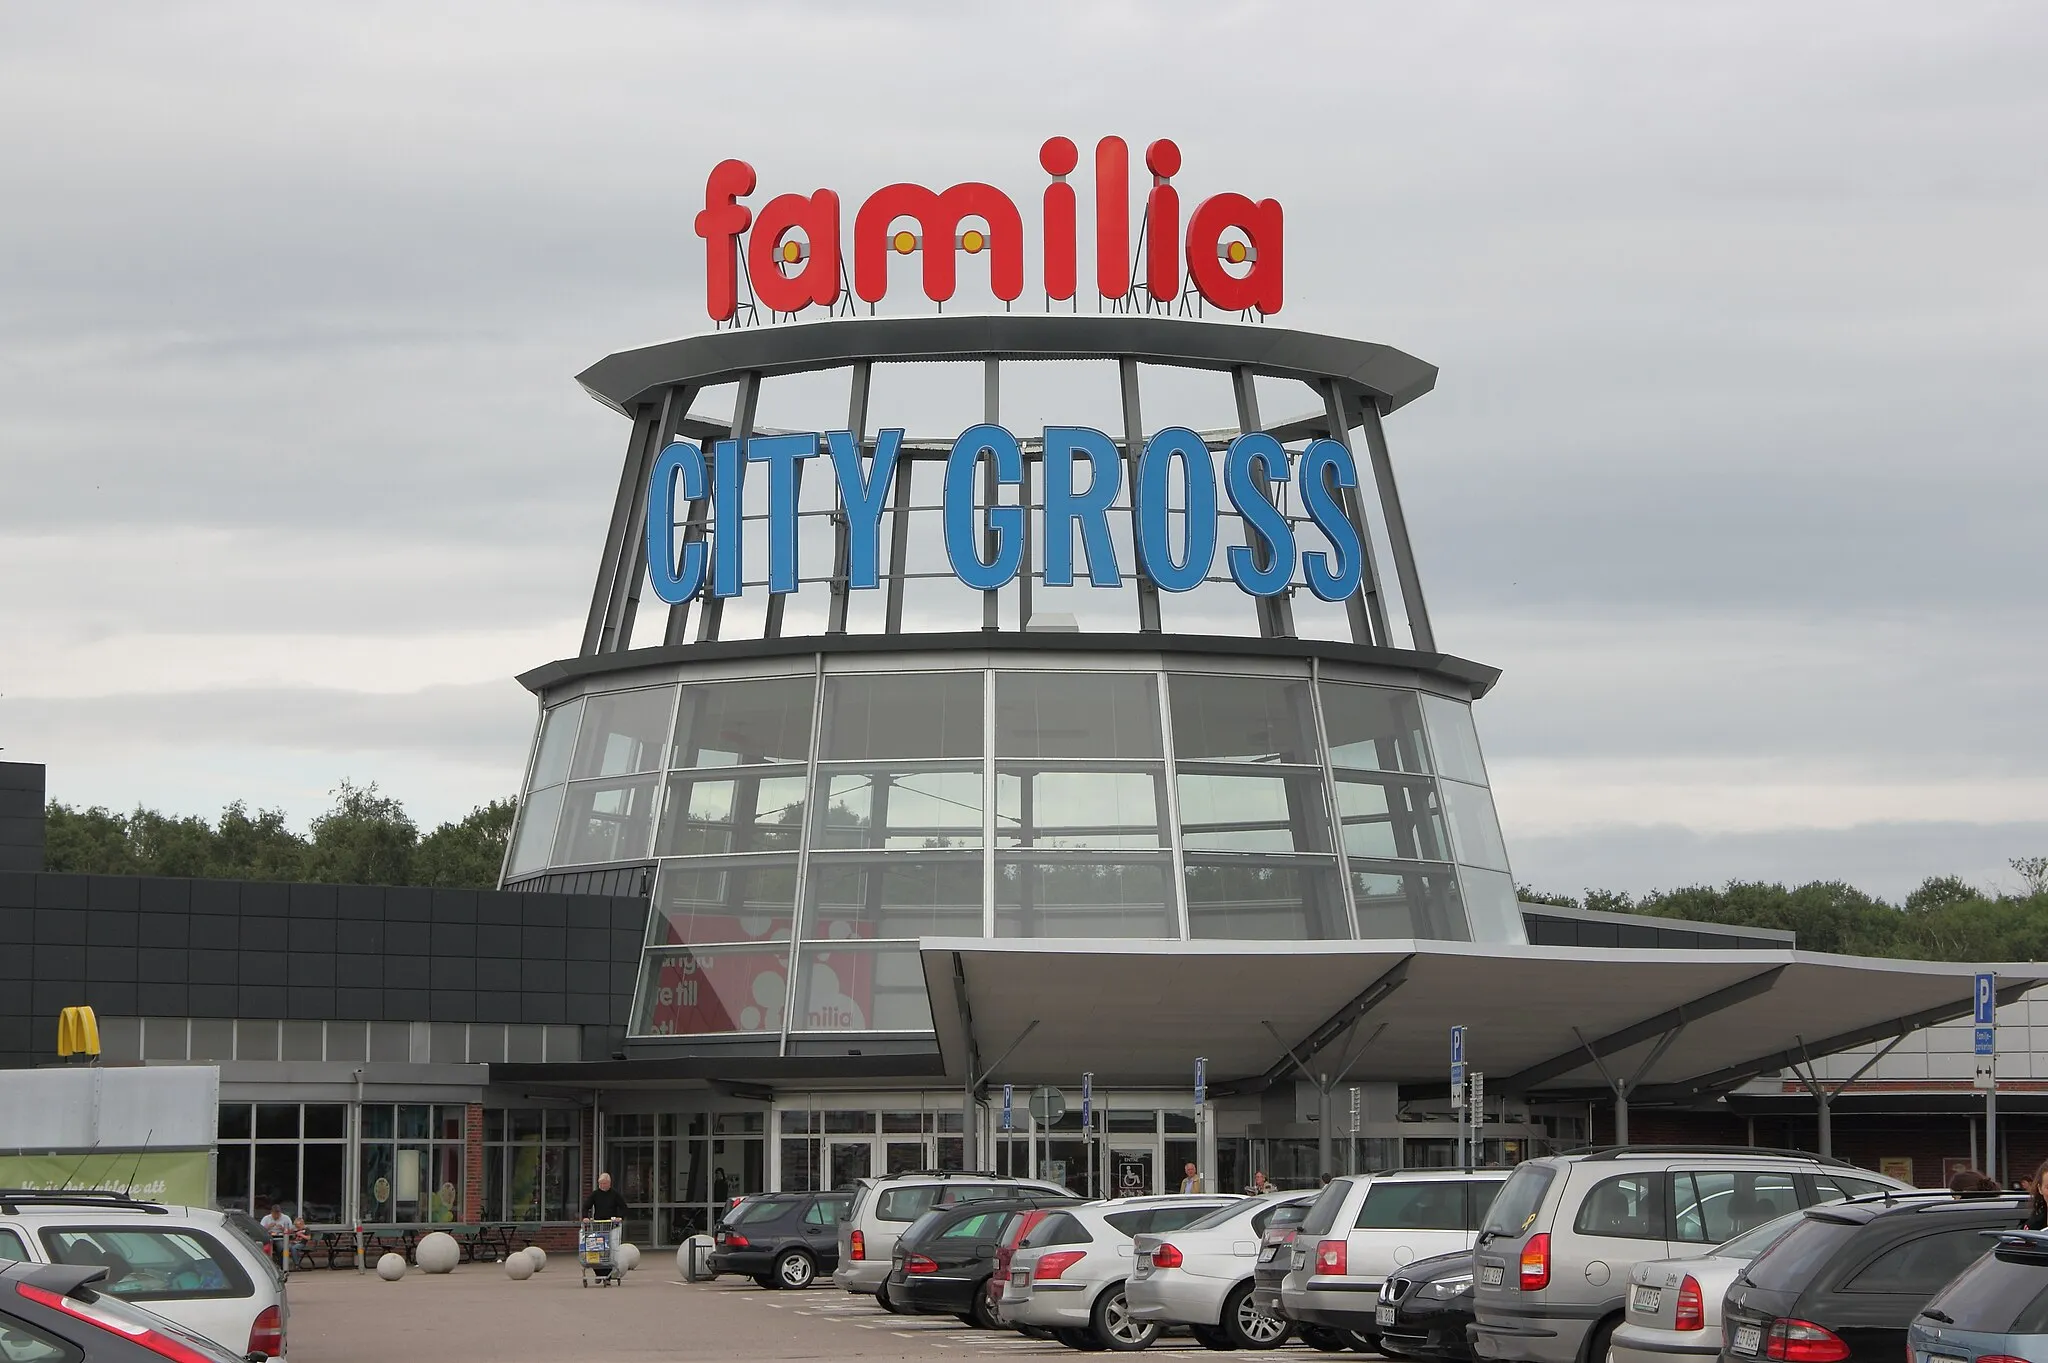 Photo showing: The entrance to Familia/City Gross in Hyllinge, Sweden